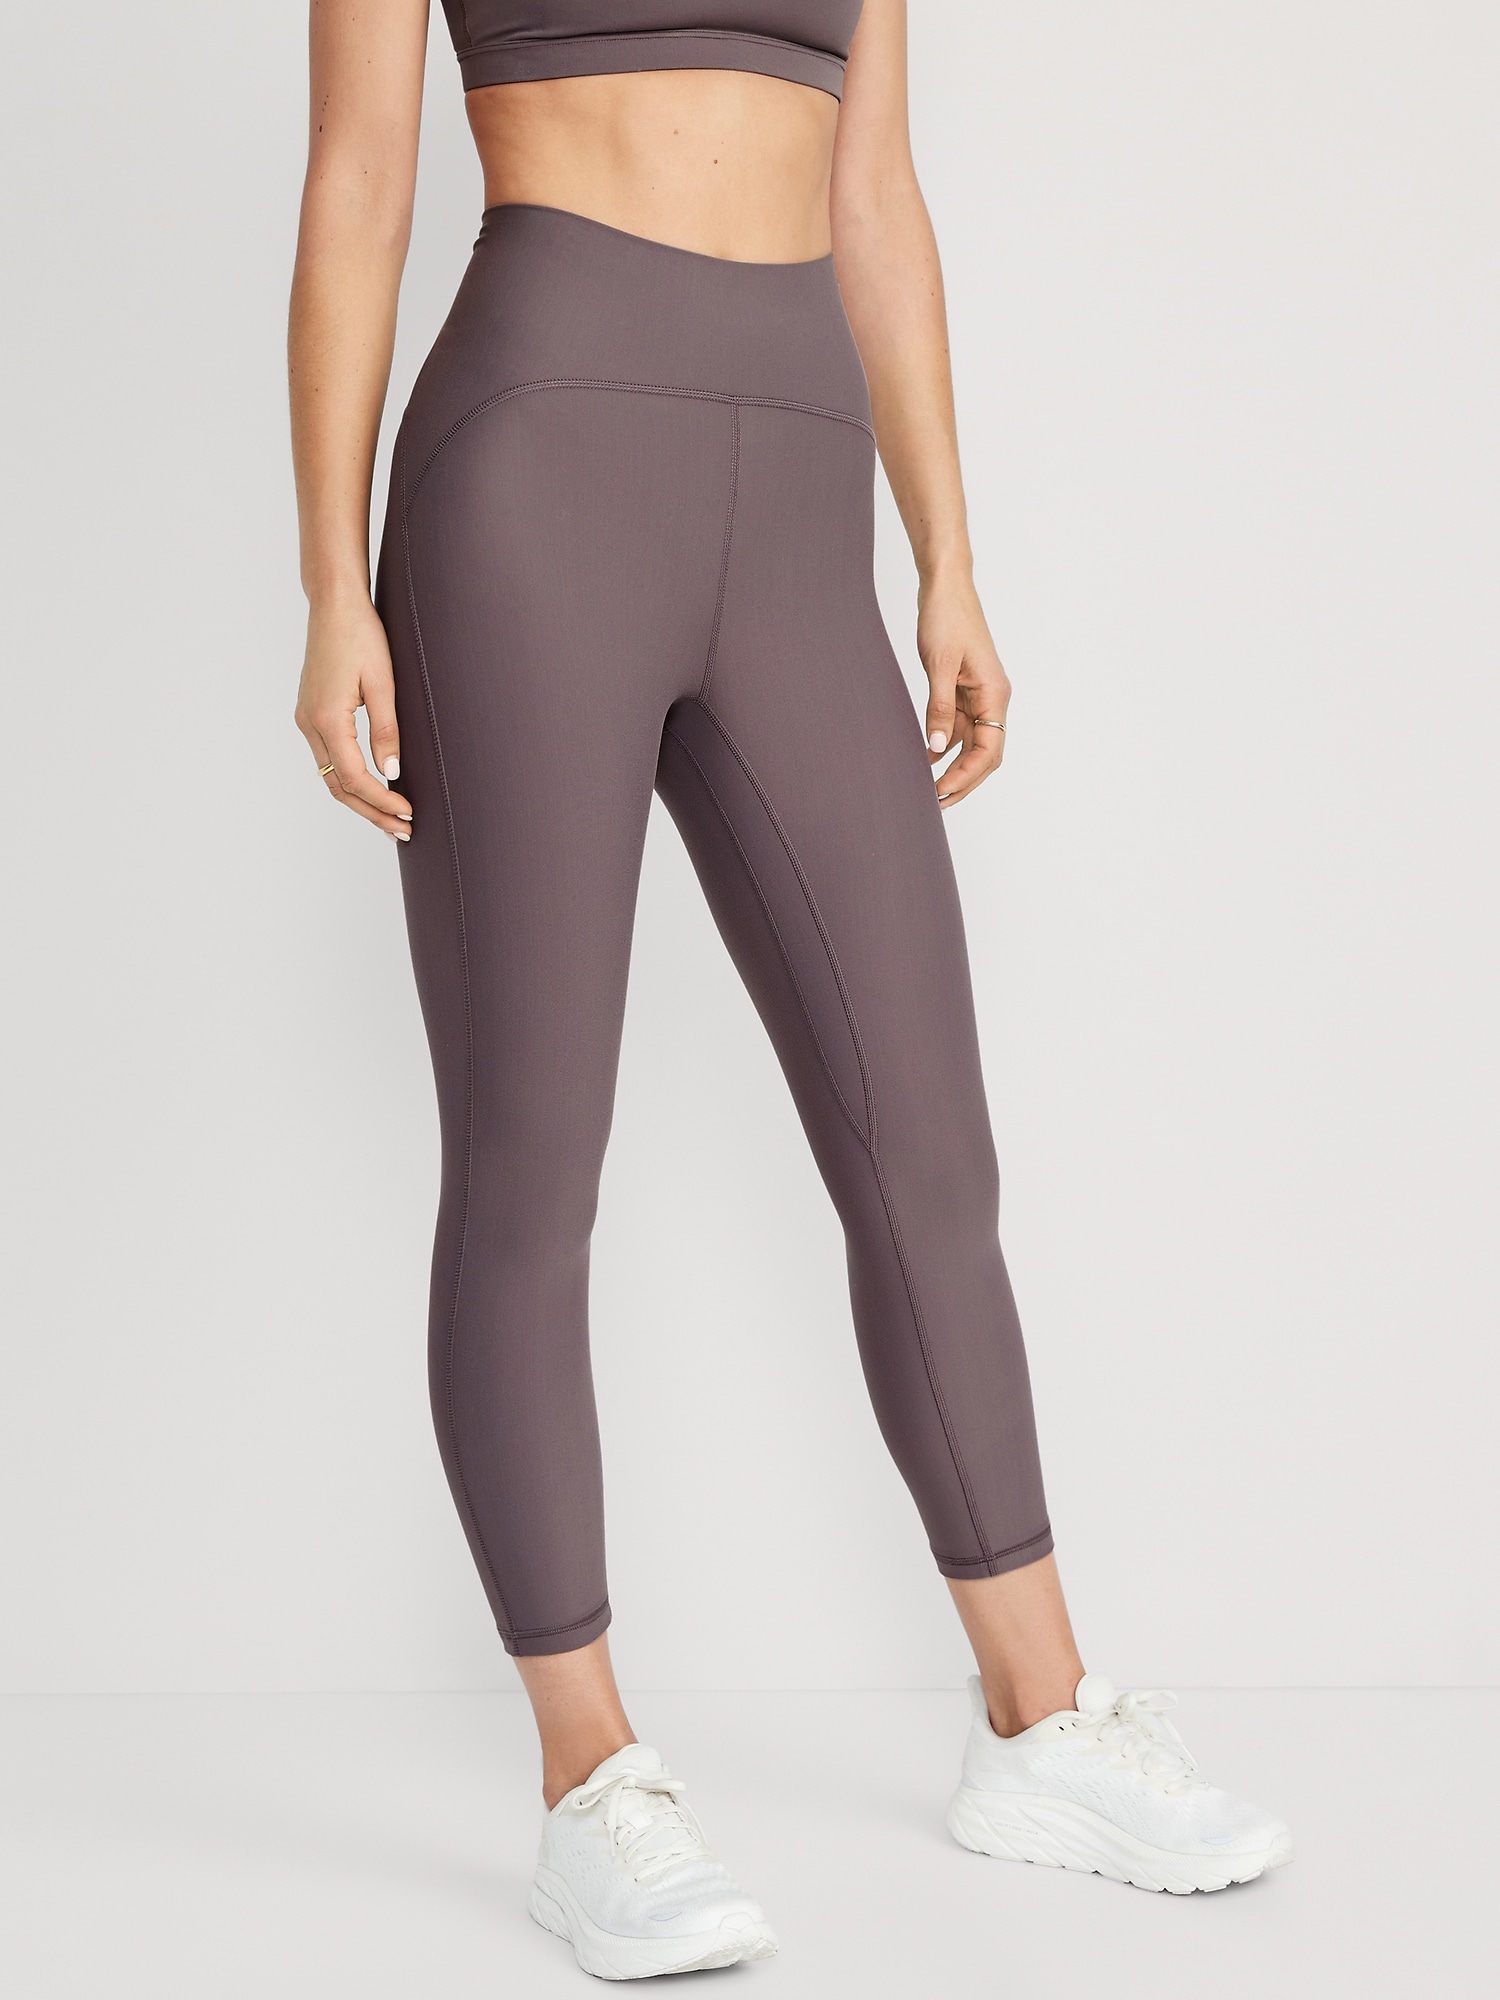 Old Navy Extra High-Waisted PowerLite Lycra® ADAPTIV Cropped Leggings for Women purple. 1